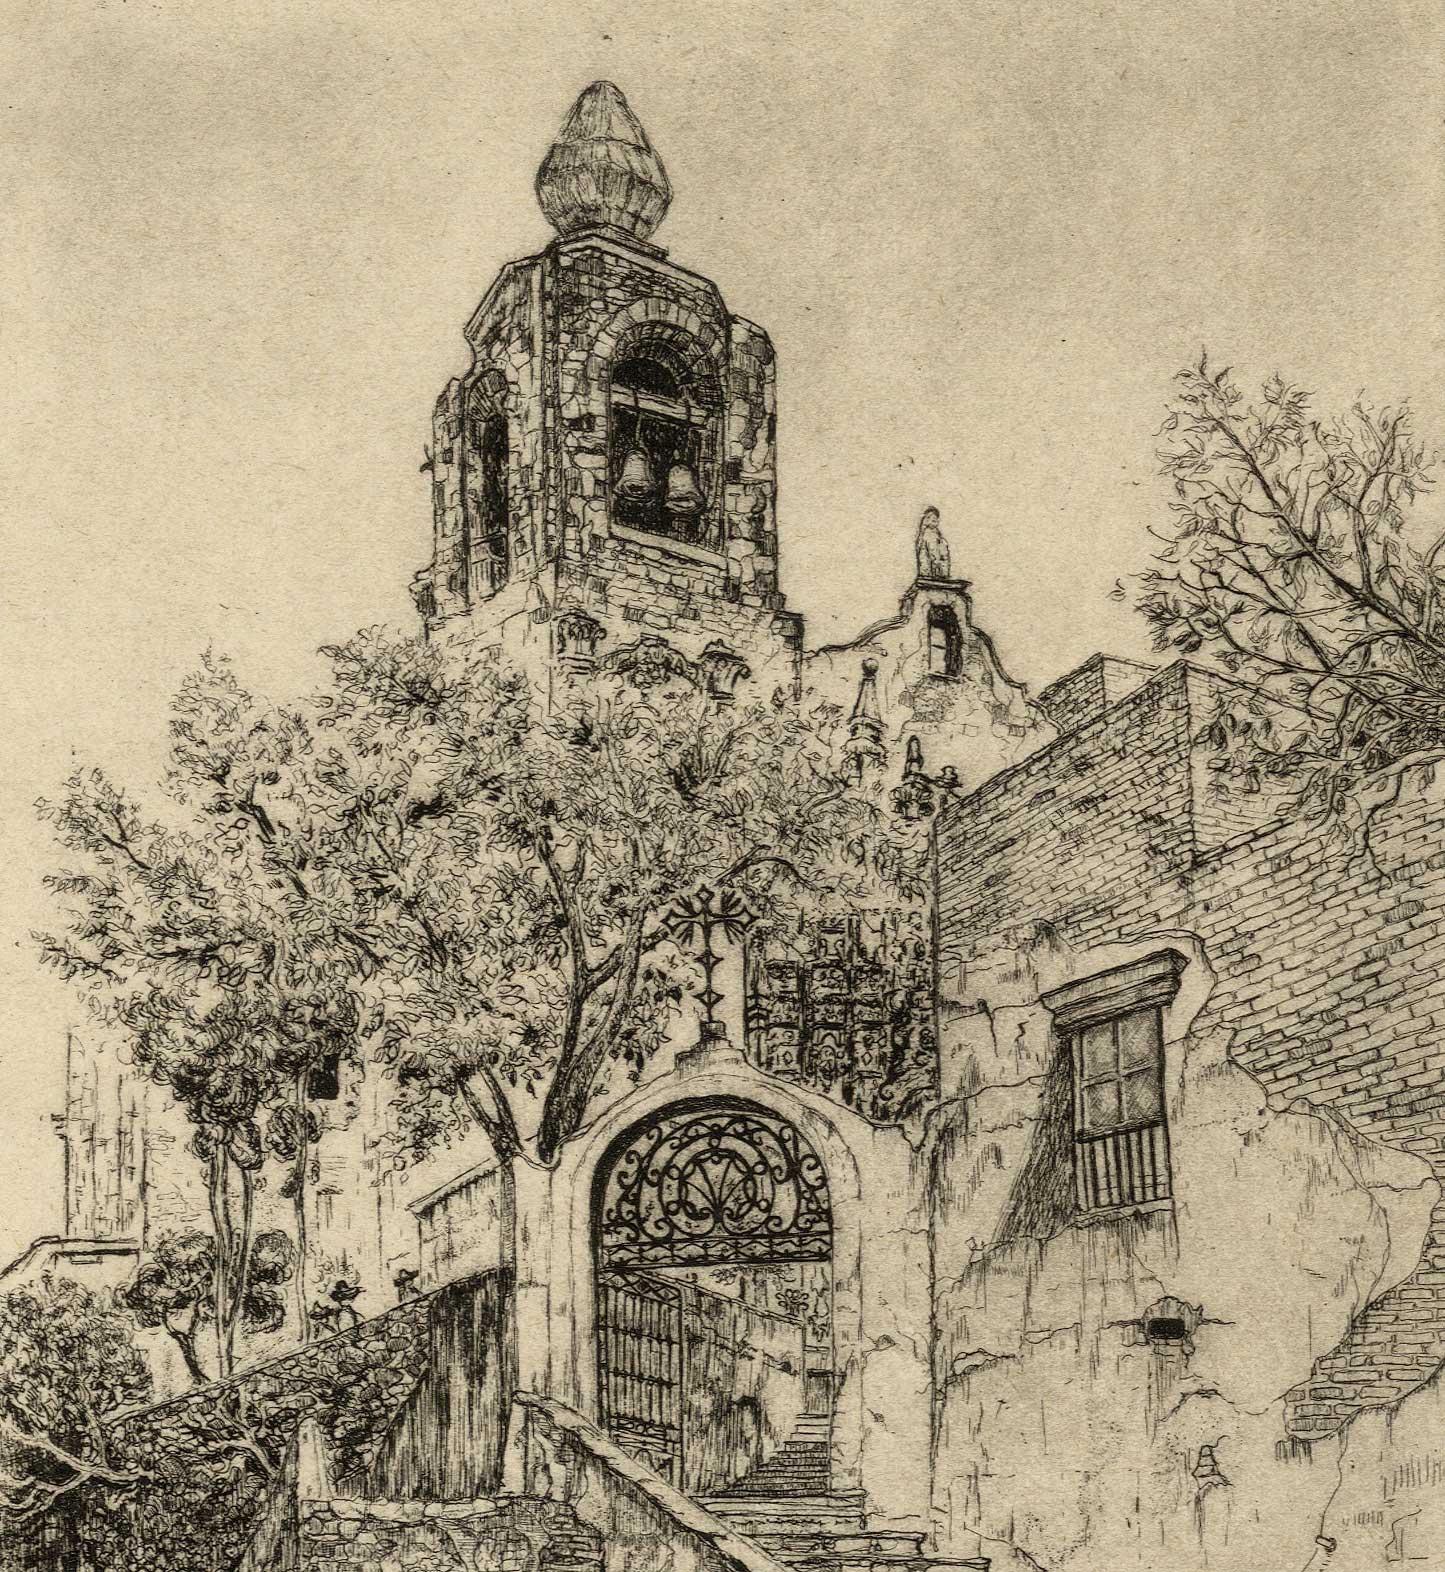 La Valenciana - Old Mexico (Church of the Silver Mines, Guanajuato Mexico) - Print by Willie Lucille Reed Rowe